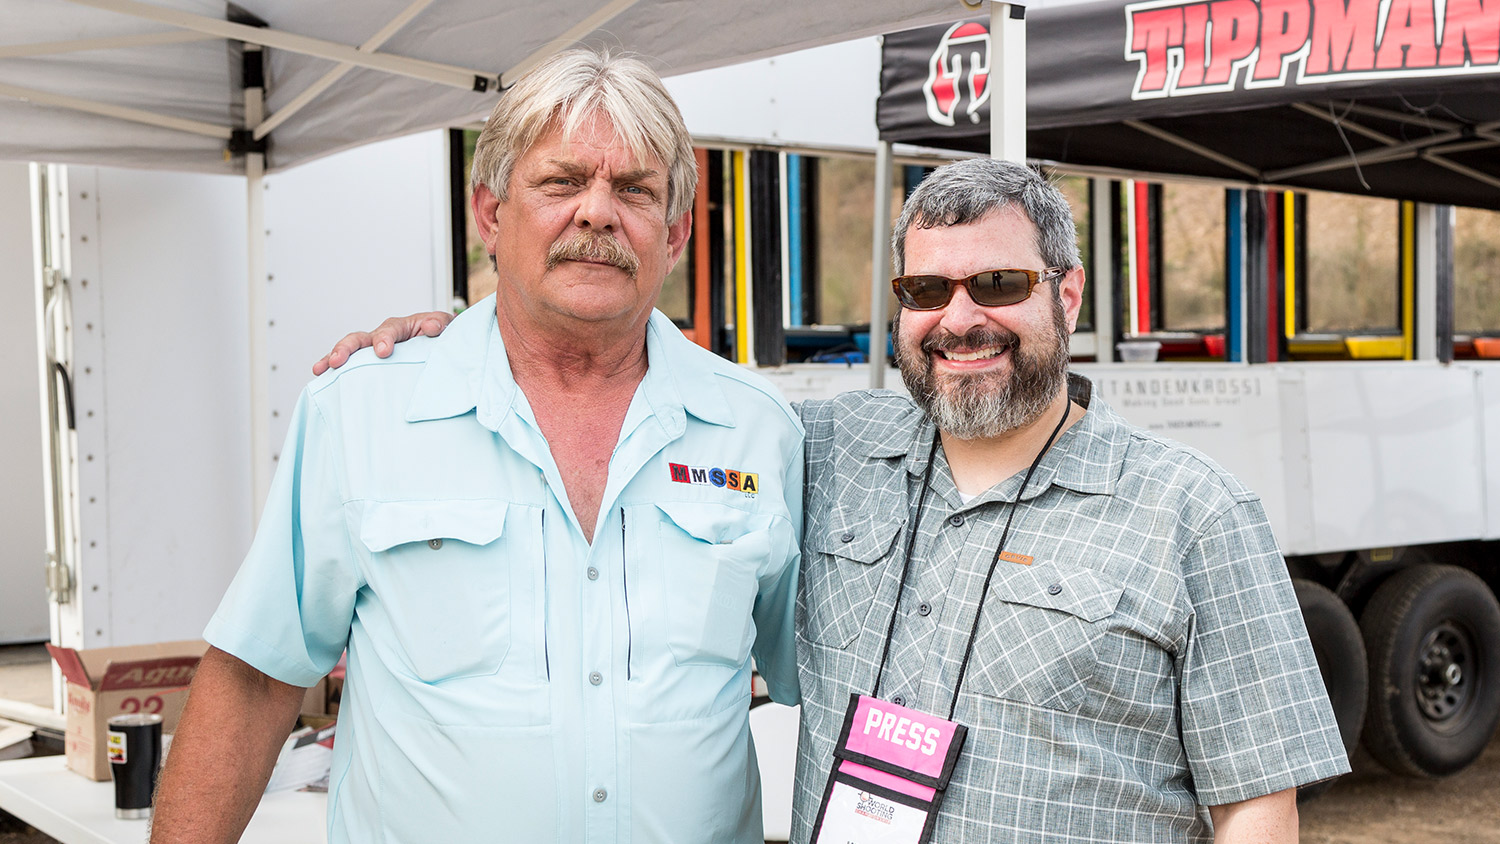 John Parker and Ed White at the 2019 NRA World Shooting Championship